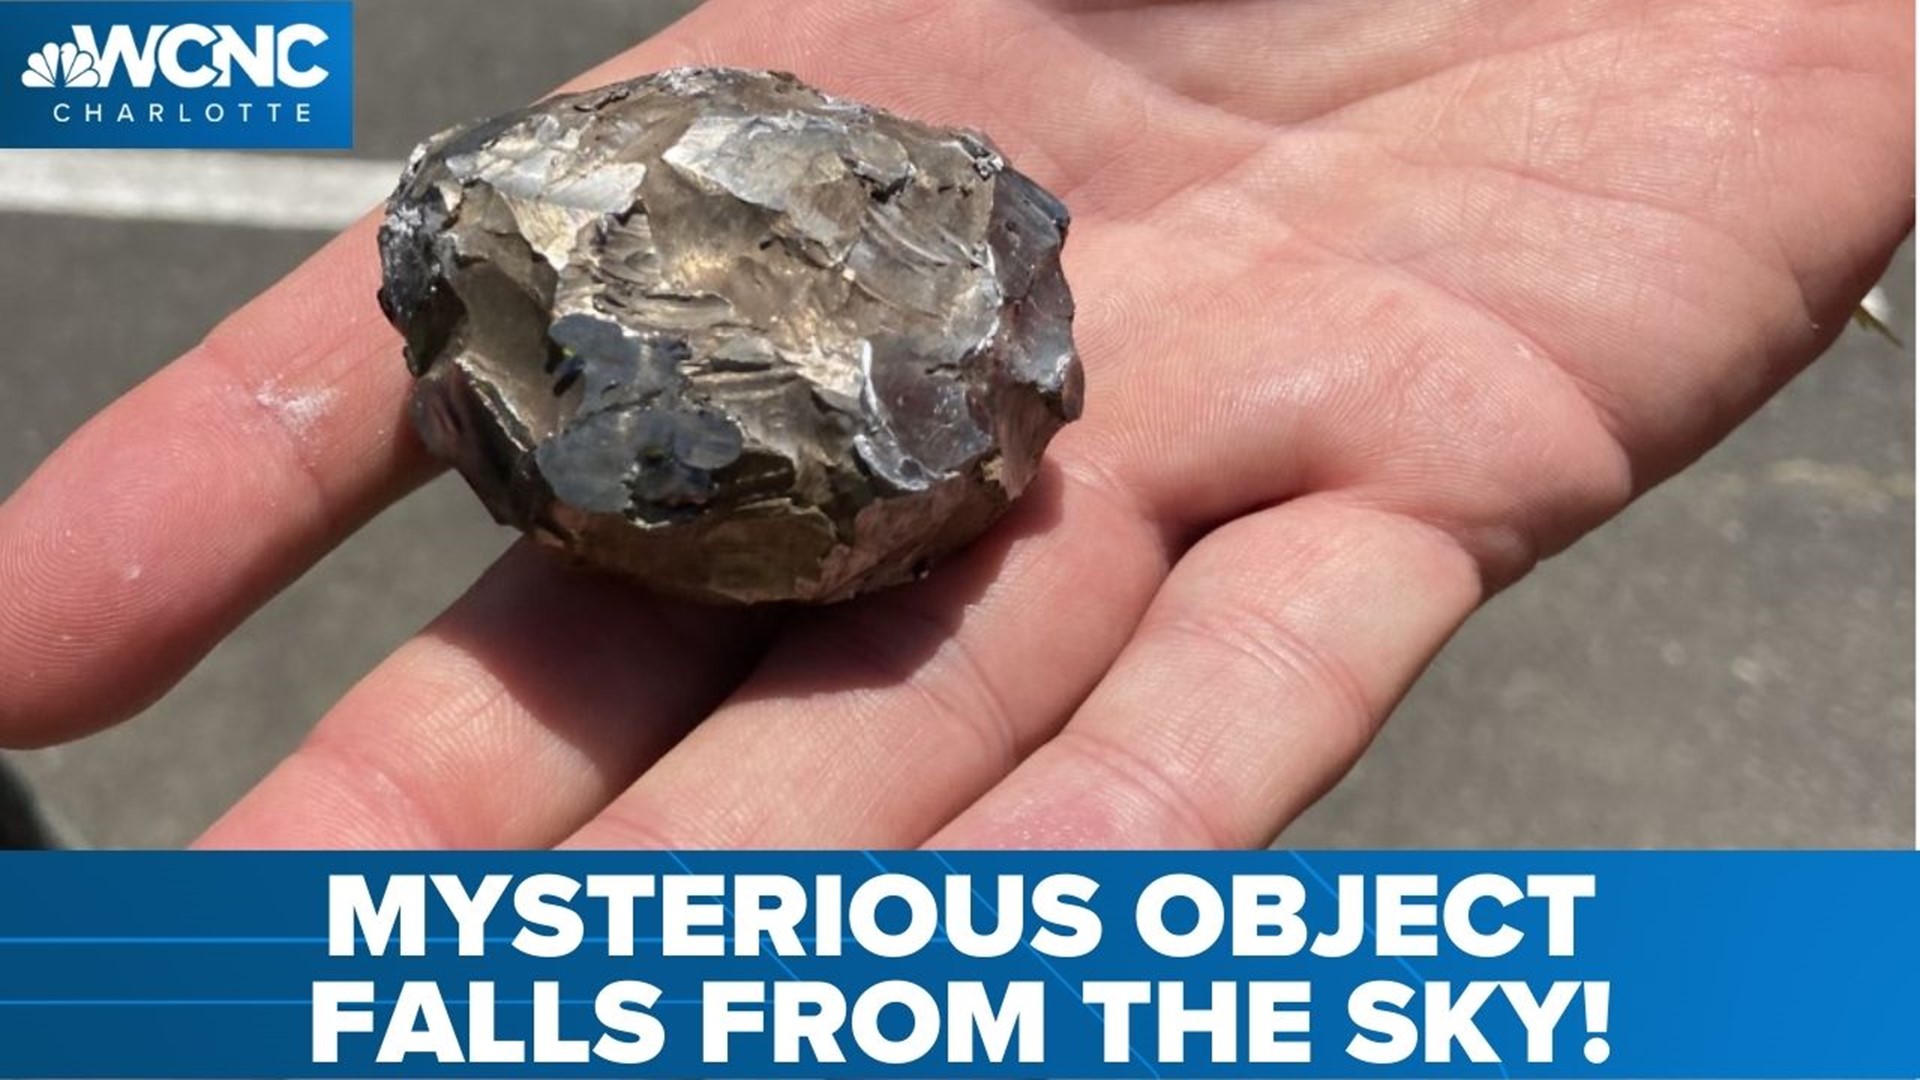 A mysterious object fell from the sky without warning. It shattered a window and left behind an unsolved mystery.